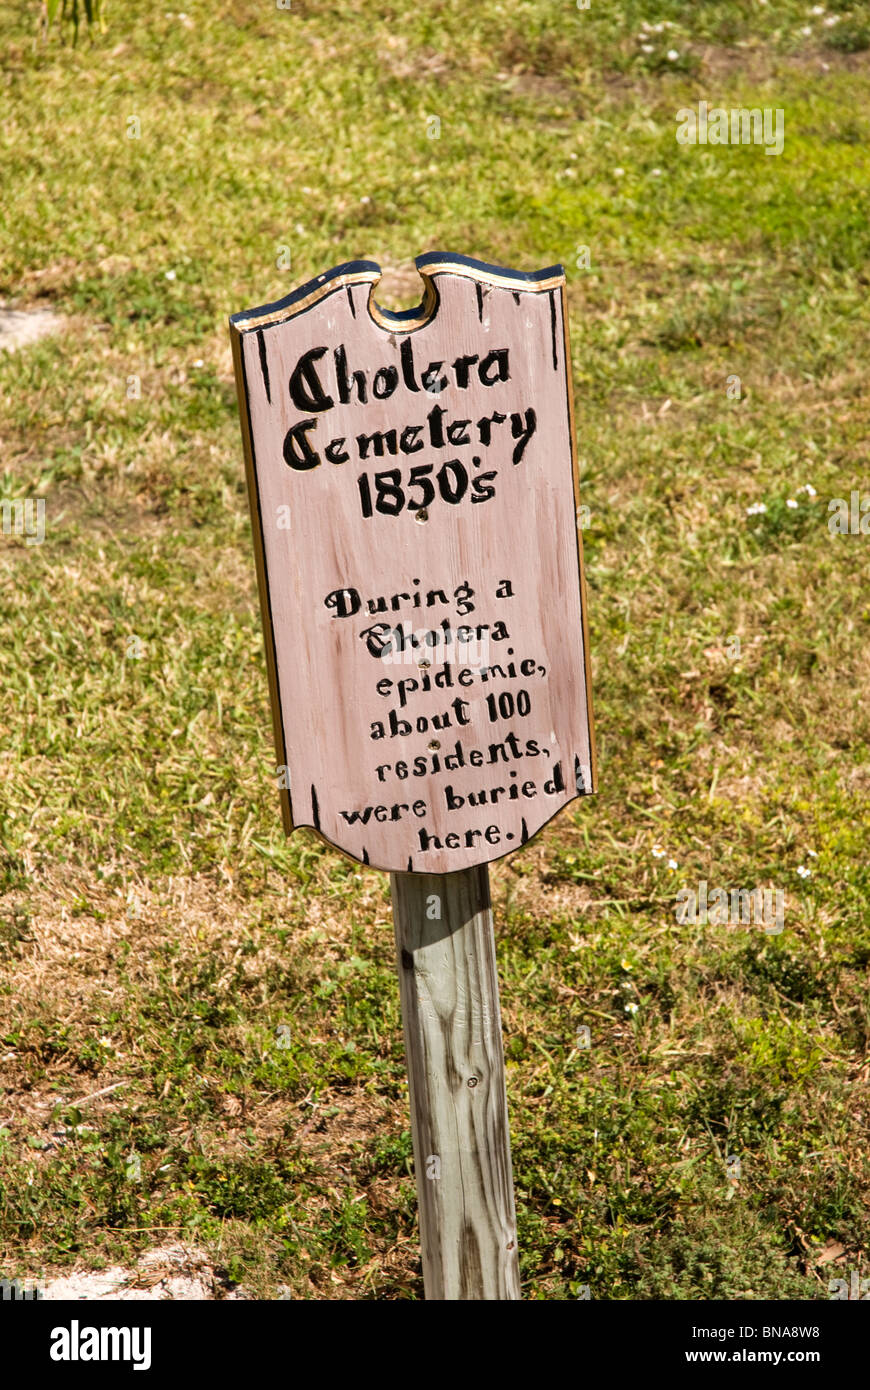 Cemetery Sign Stock Photos & Cemetery Sign Stock Images - Alamy